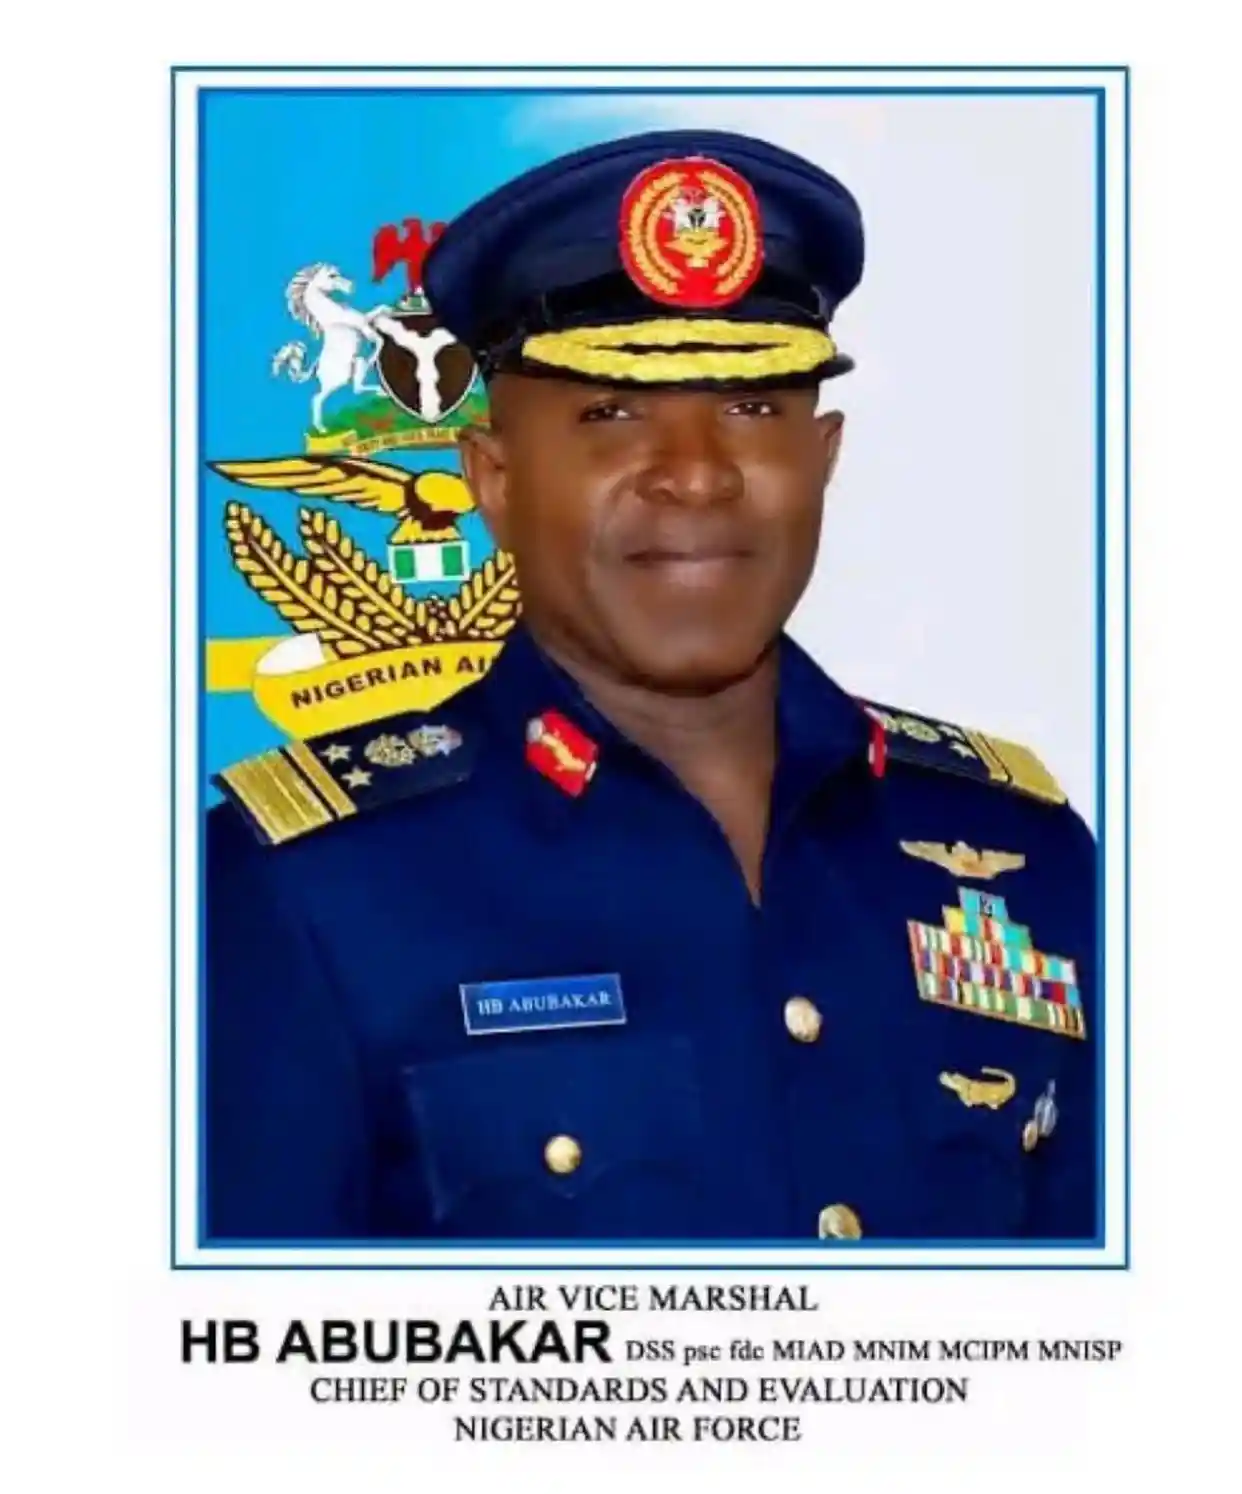 Air Vice Marshal Hassan Bala Abubakar, Newly appointed Chief of Staff to Nigeria AirForce. He hails from Shanono LGA, Kano State.